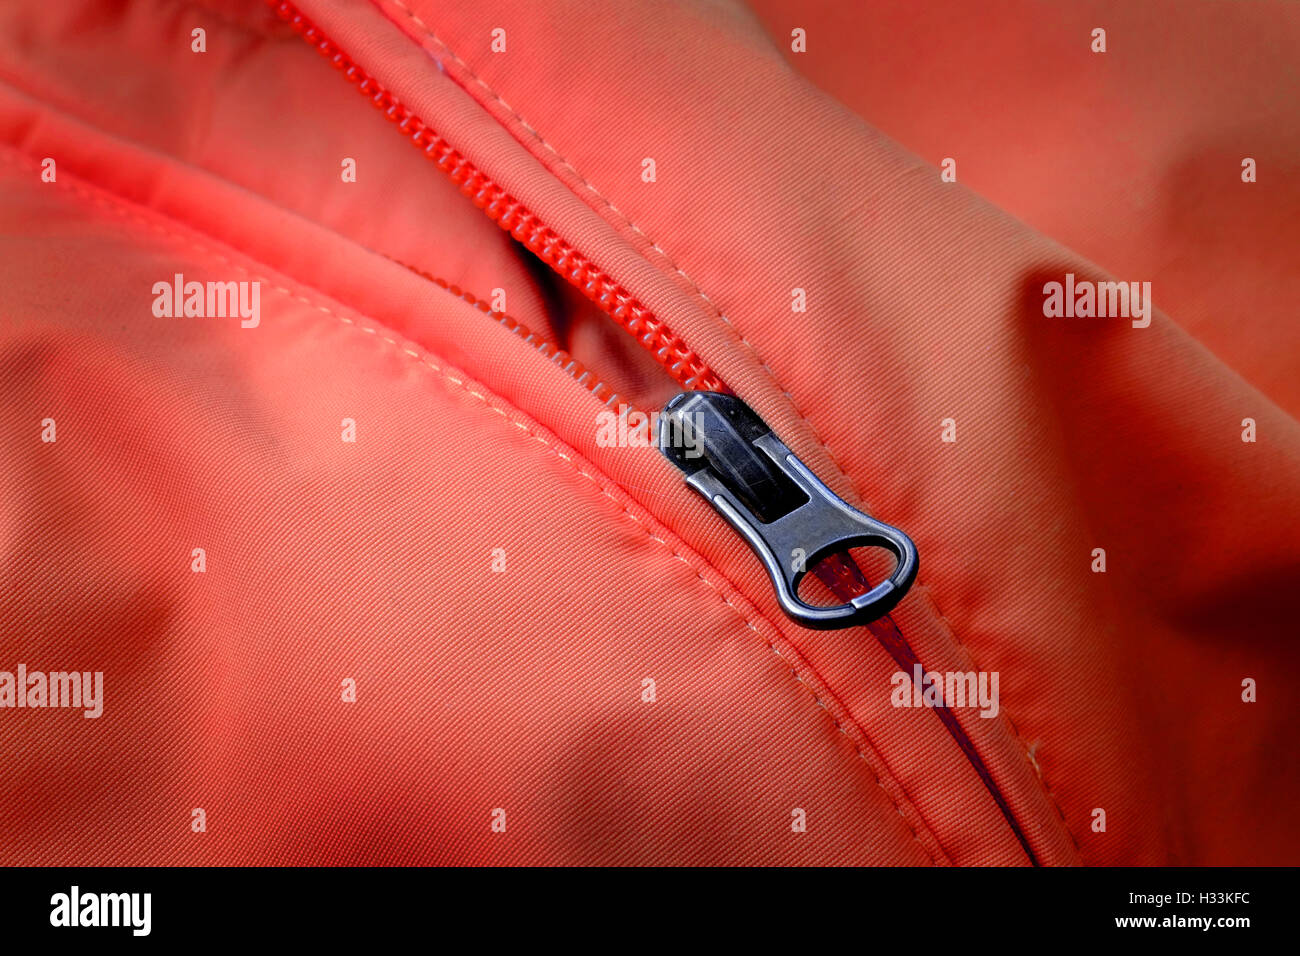 Closeup of zipper on Red coat with texture Stock Photo